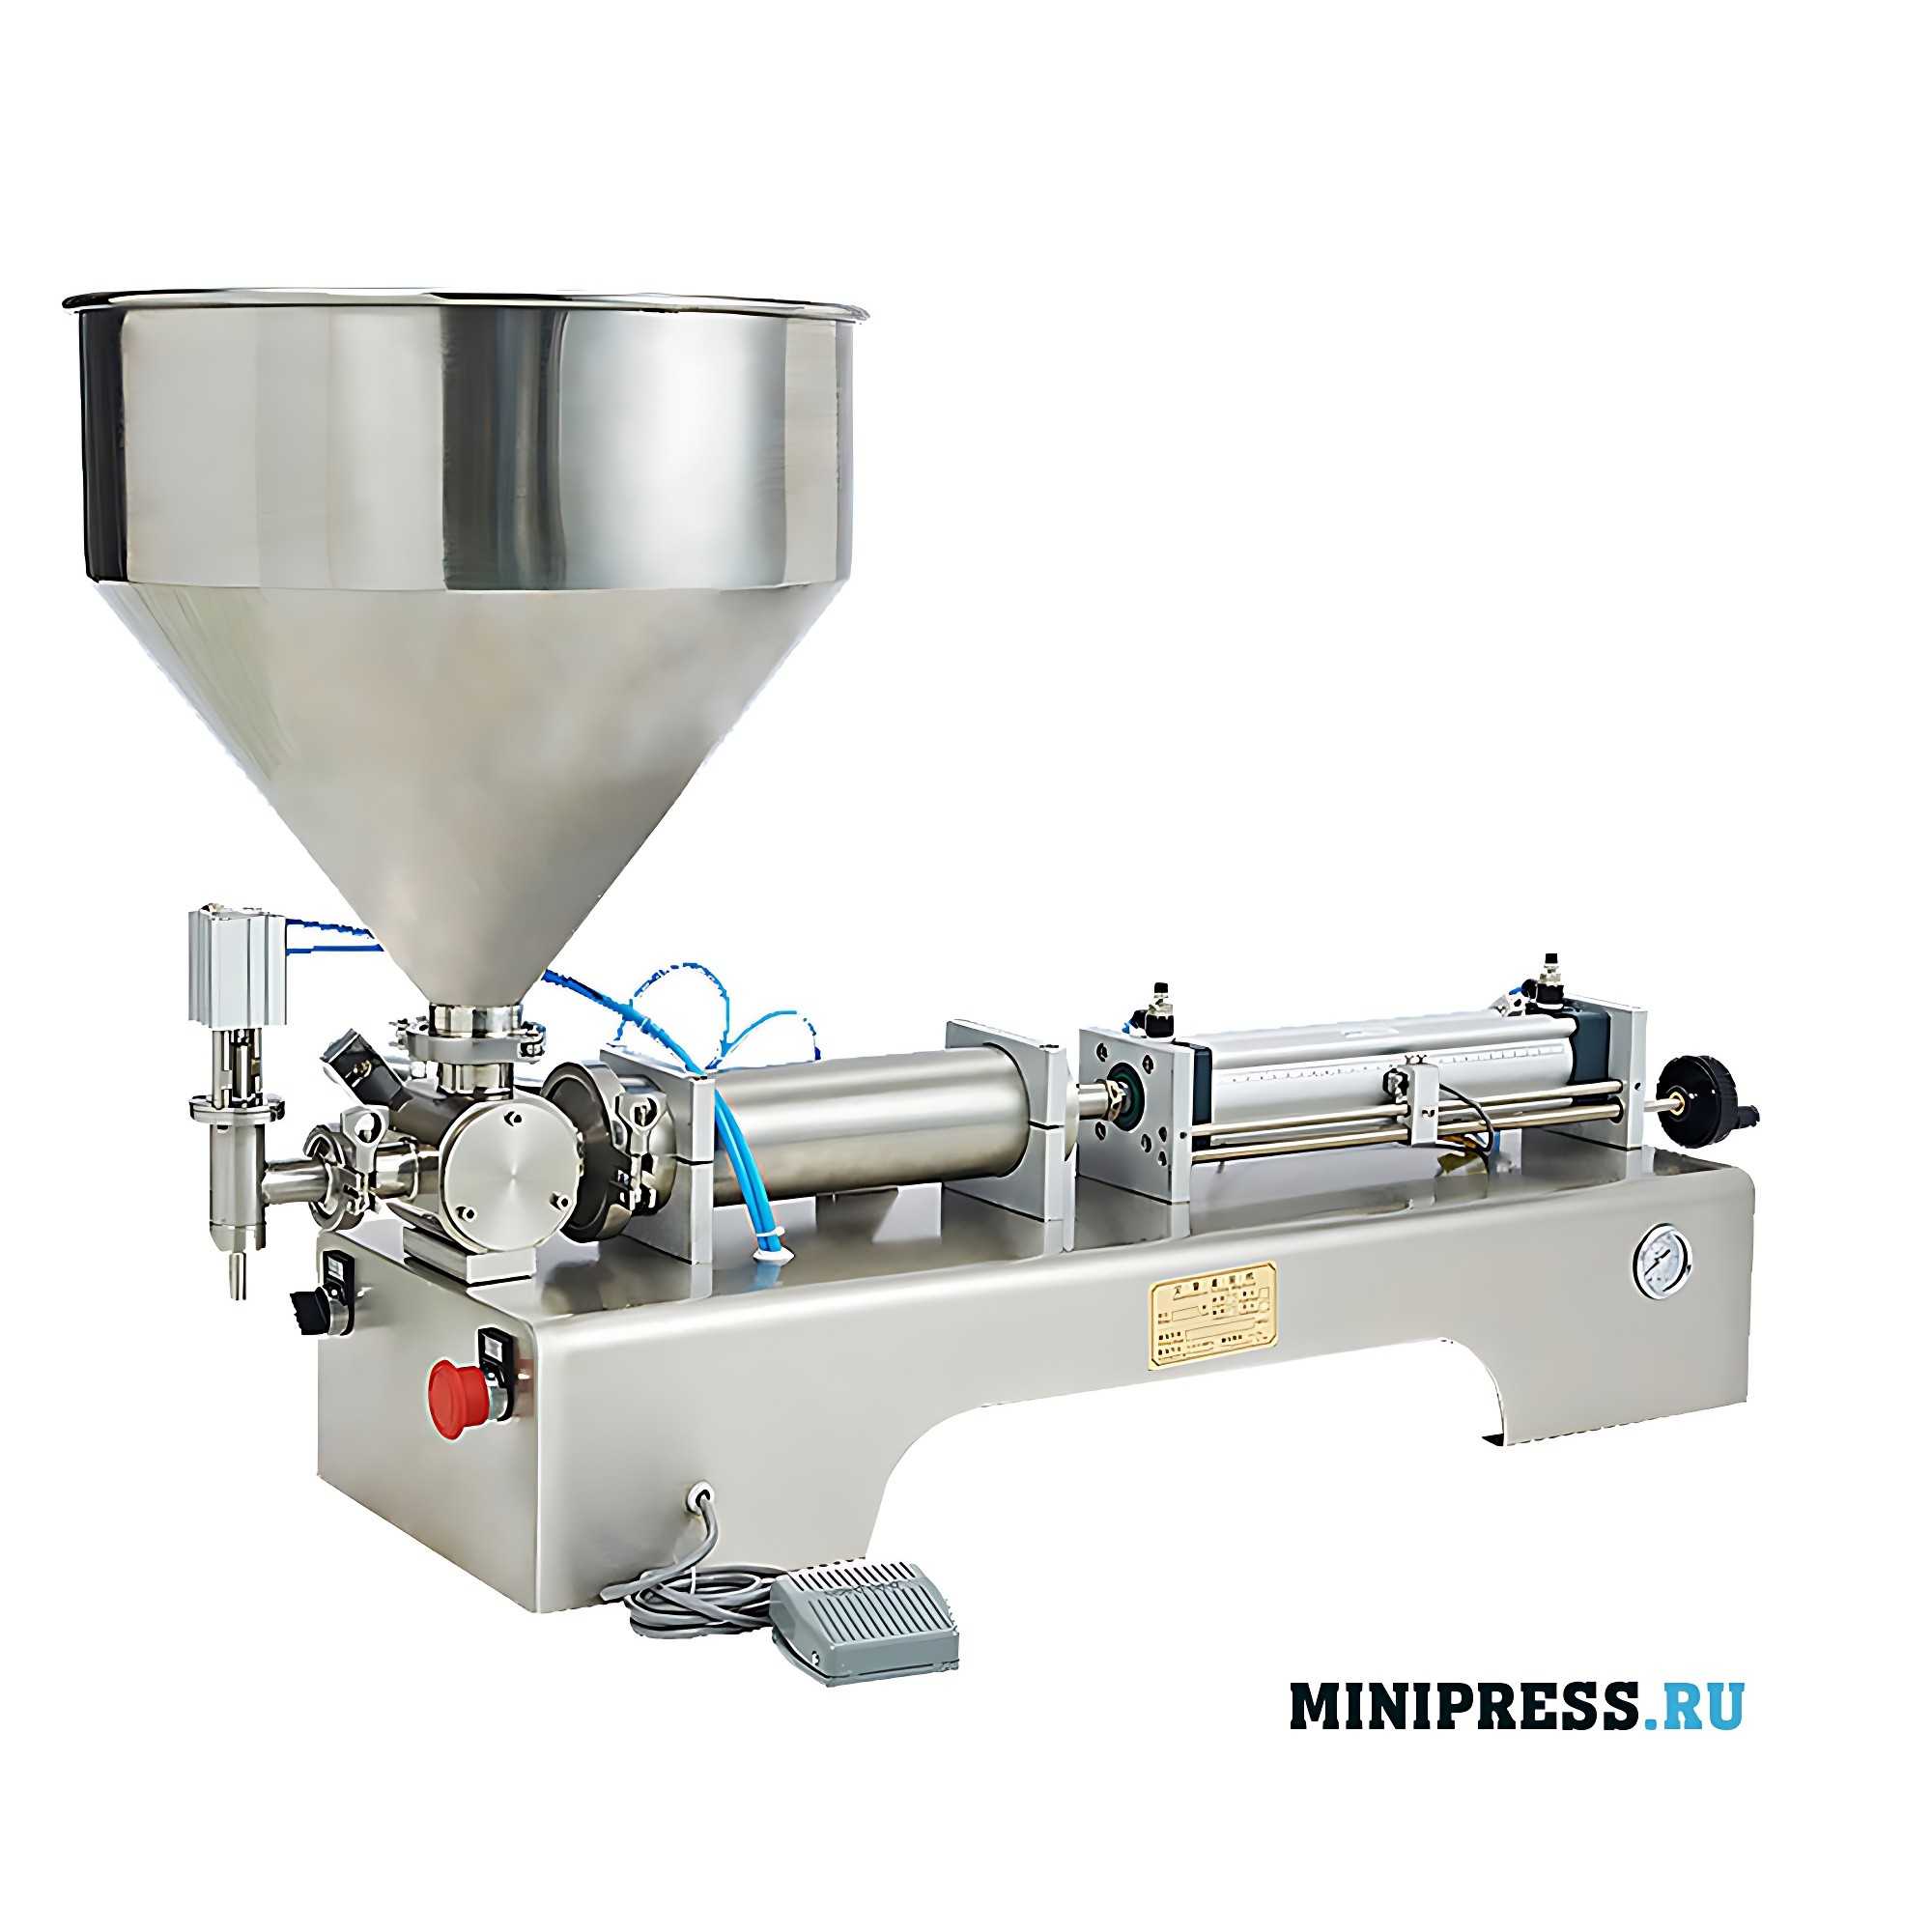 Pneumatic piston dispenser for creams and ointments WW-50